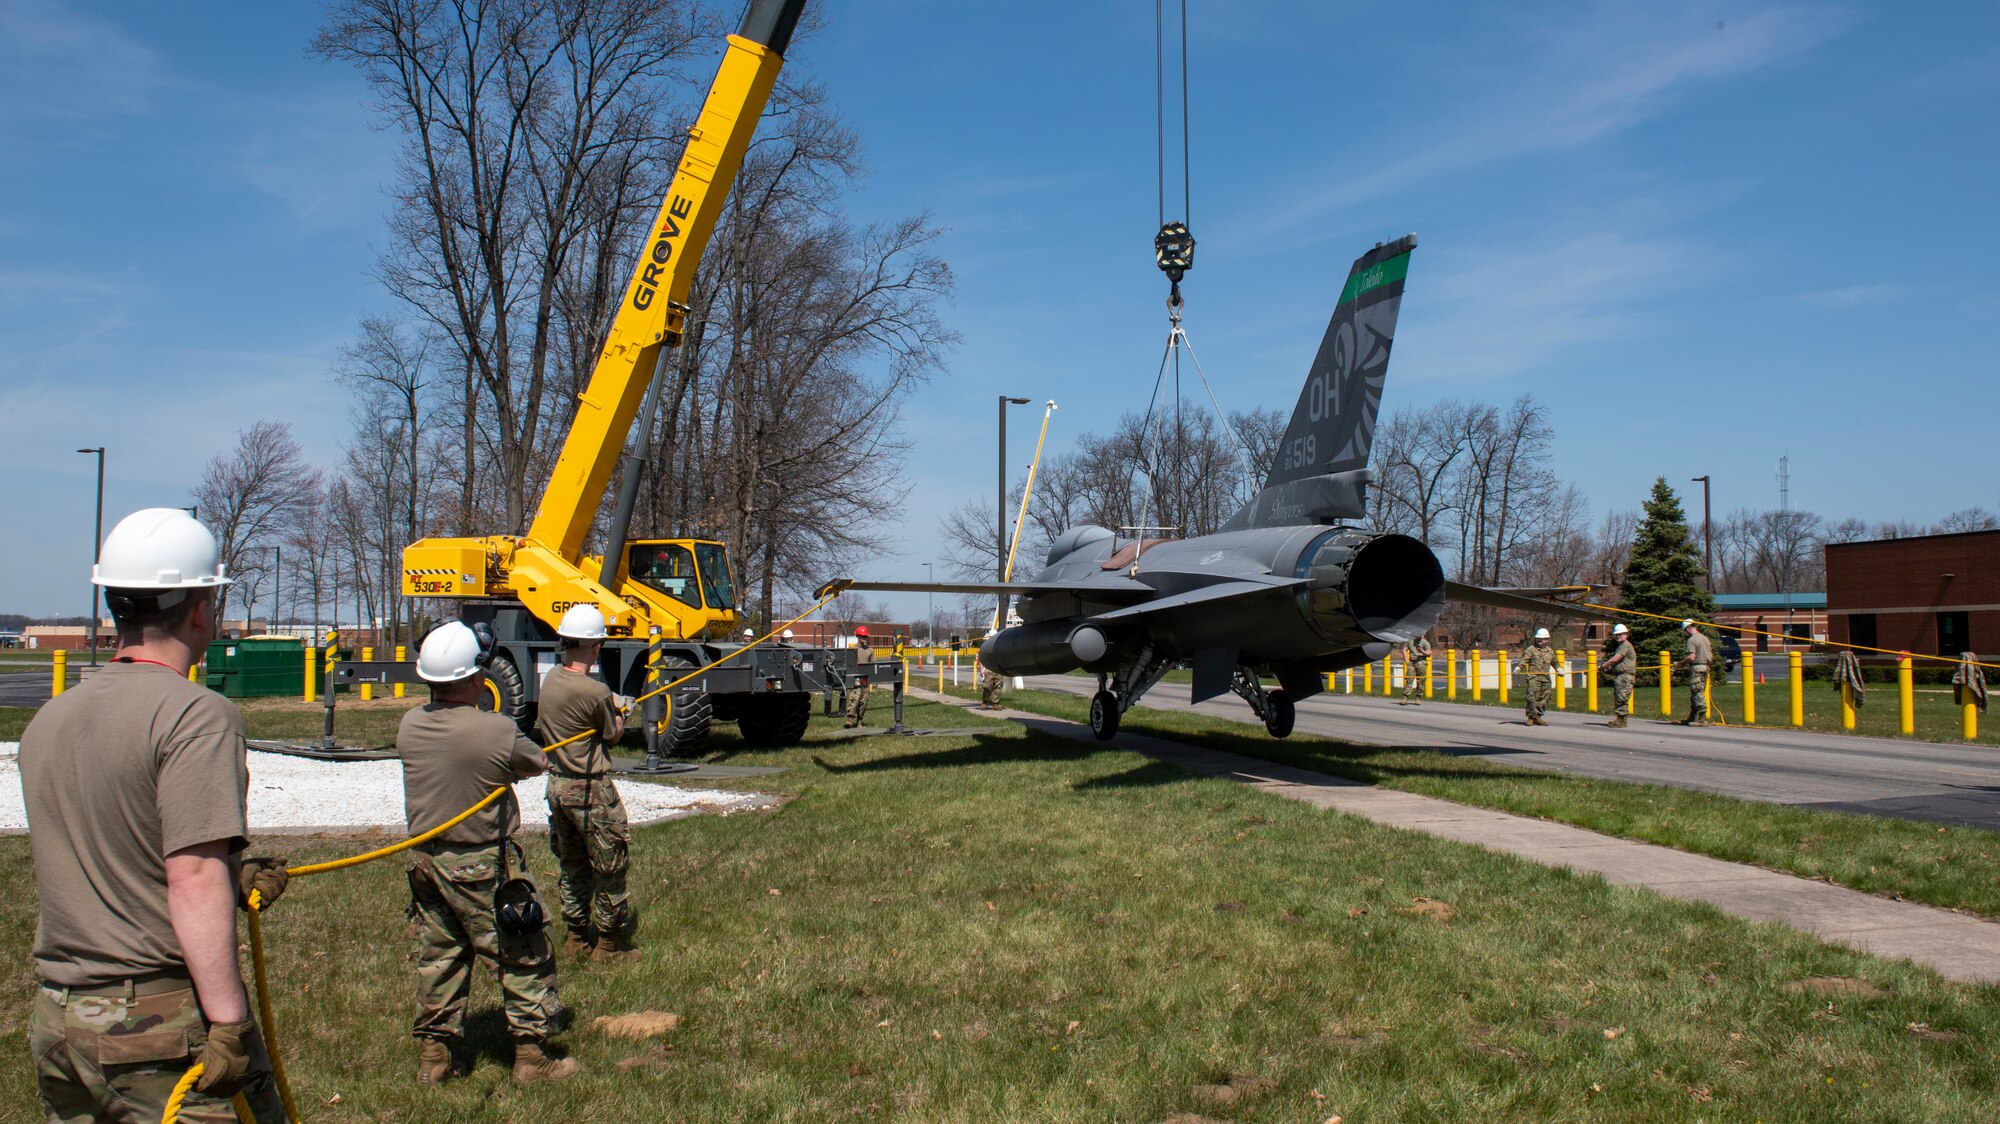 Airmen, assigned to the Ohio Air National Guard’s 180th Fighter Wing, move an F-16 Fighting Falcon during Crash Damaged/Disabled Aircraft Recovery training April 23, 2022 in Swanton, Ohio.